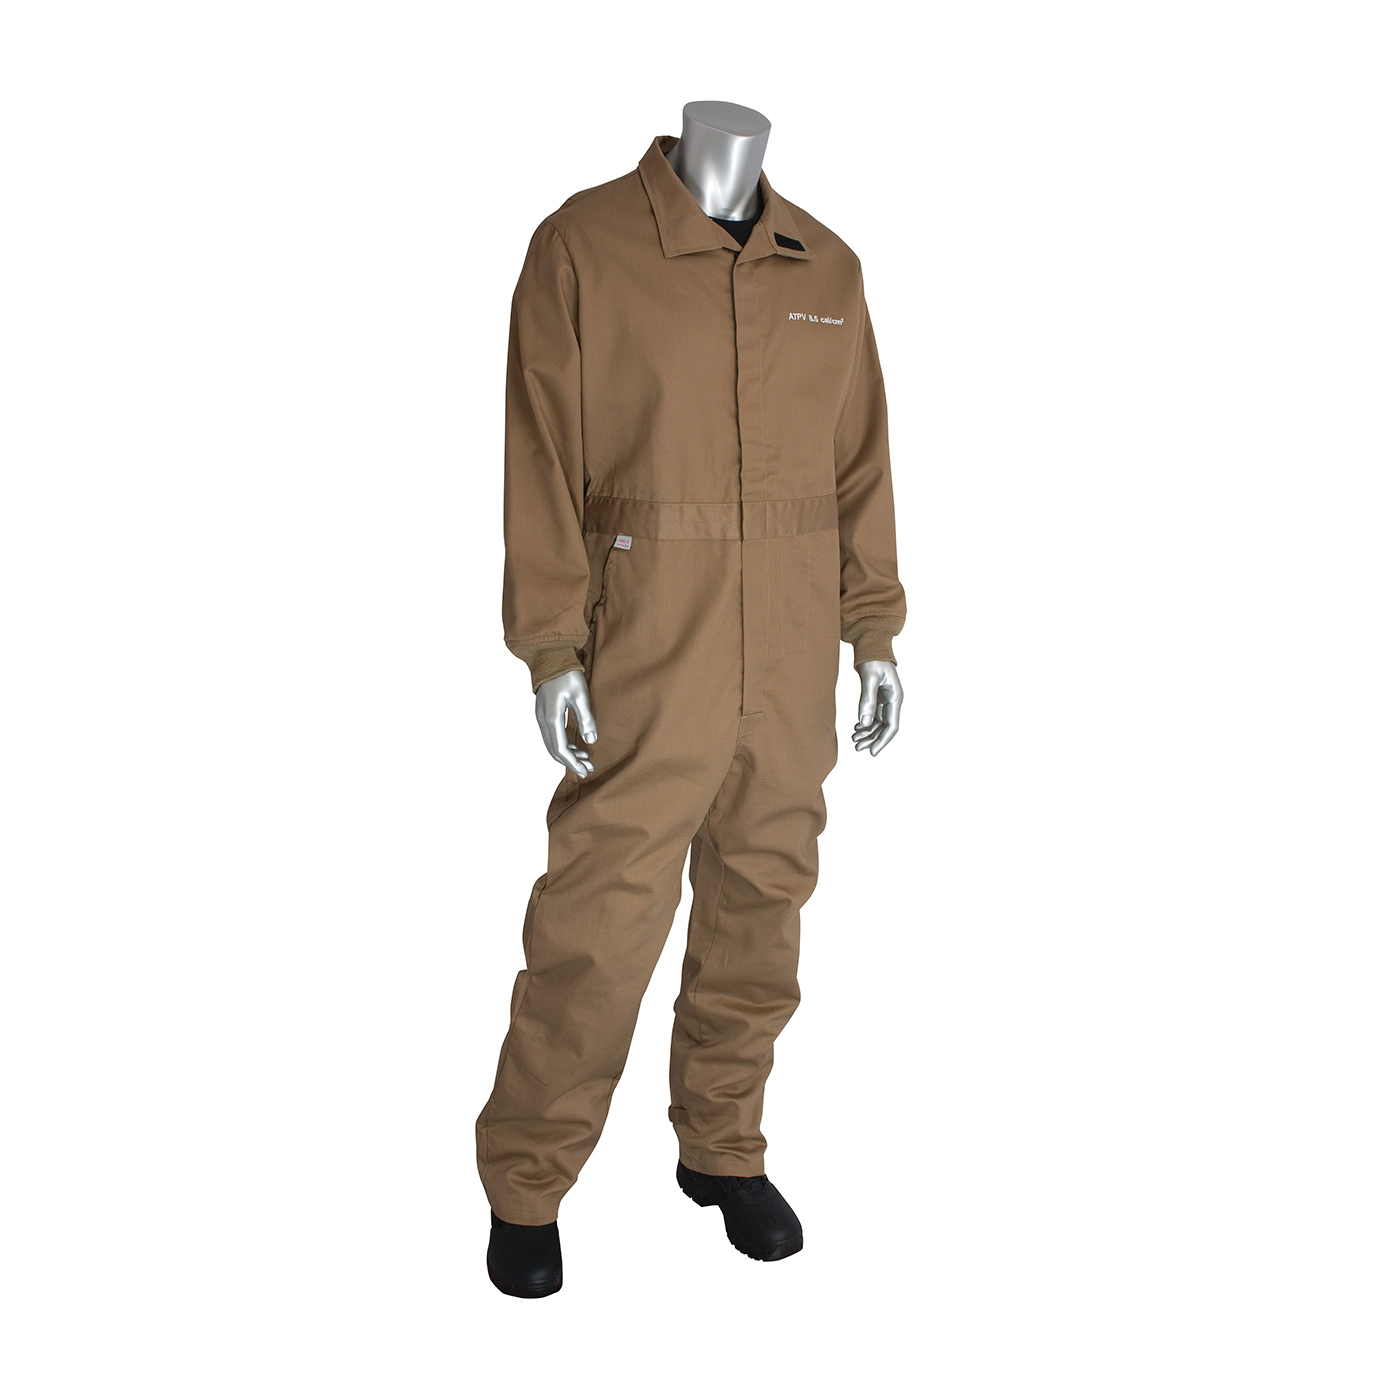 PIP® 9100-2100D/2X Flame Resistant Coverall With Vented Back, 2XL, Khaki, 90% Cotton/10% Nylon/FR Twill Weave, 52 to 54 in Chest, 32 in L Inseam